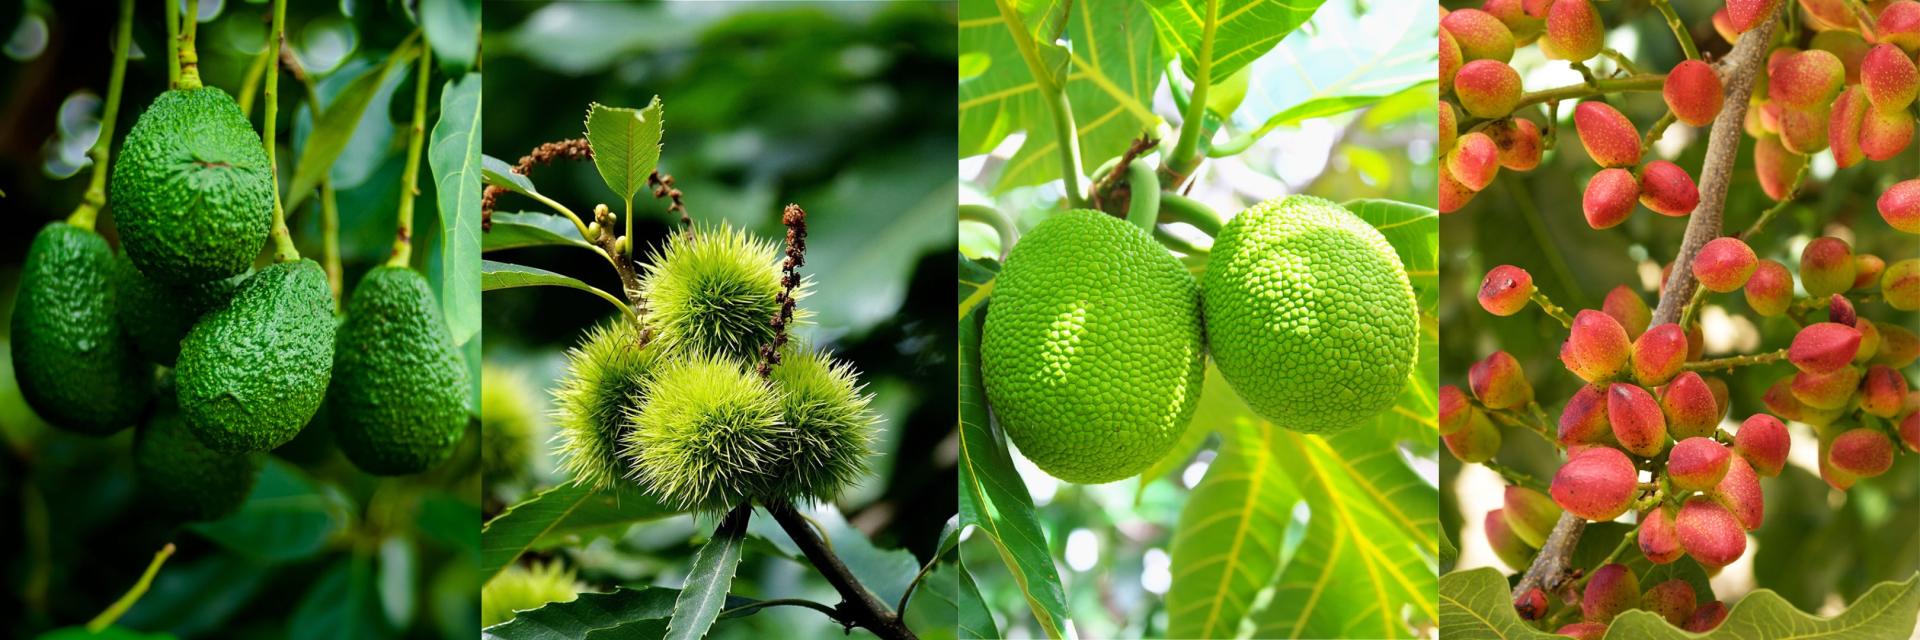 Photos of avocados, breadfruit, chestnuts, and ripe pistachios on trees.